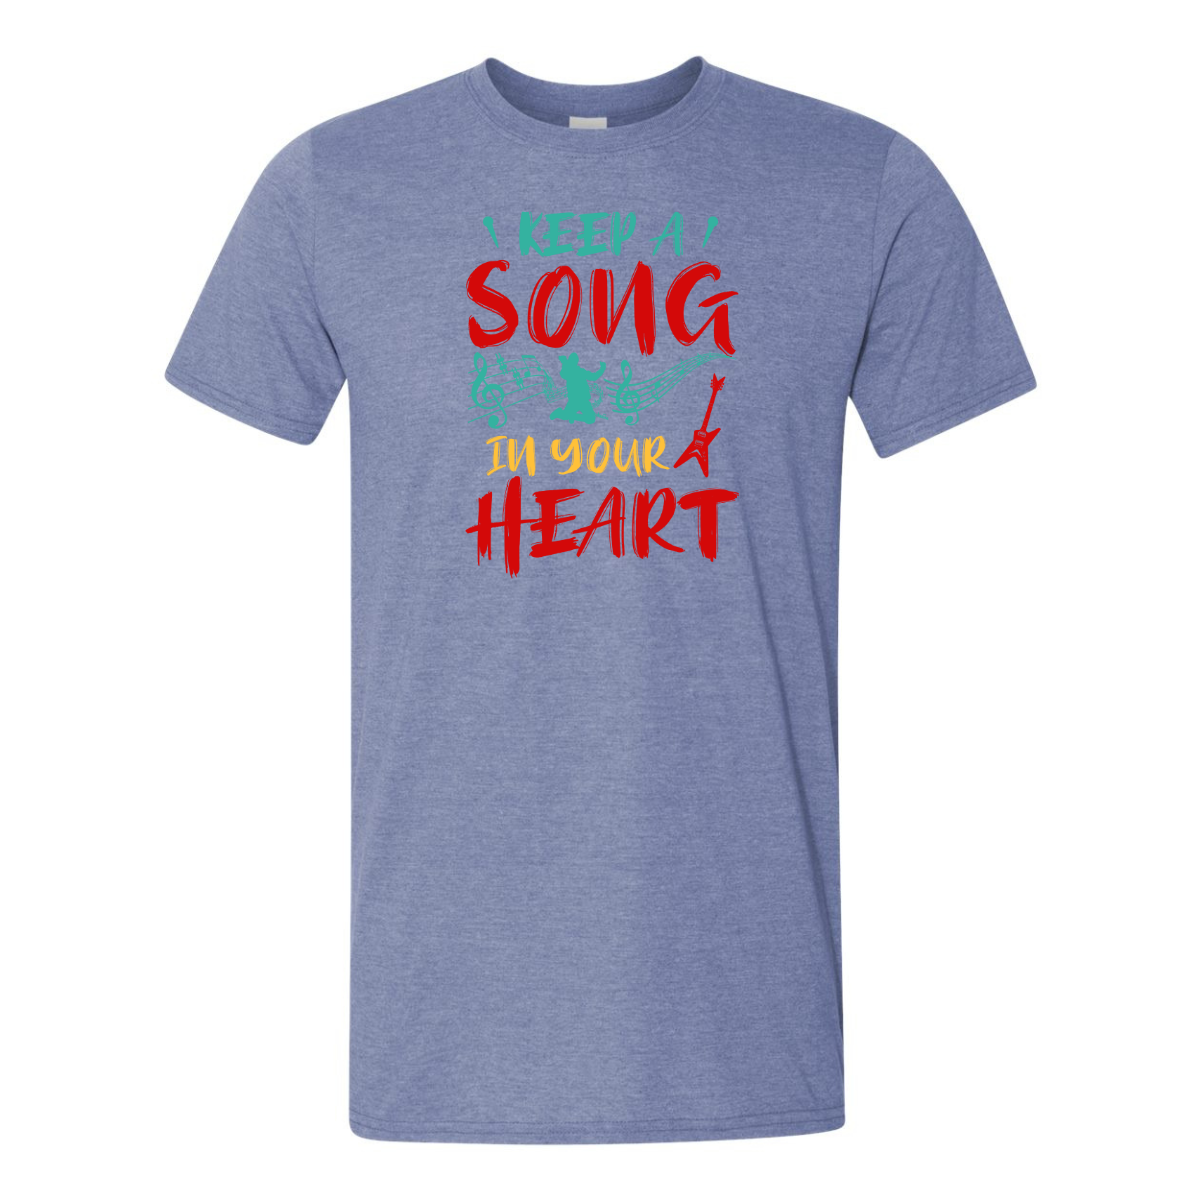 ADULT Unisex T-Shirt MUSA022 KEEP A SONG IN YOUR HEART